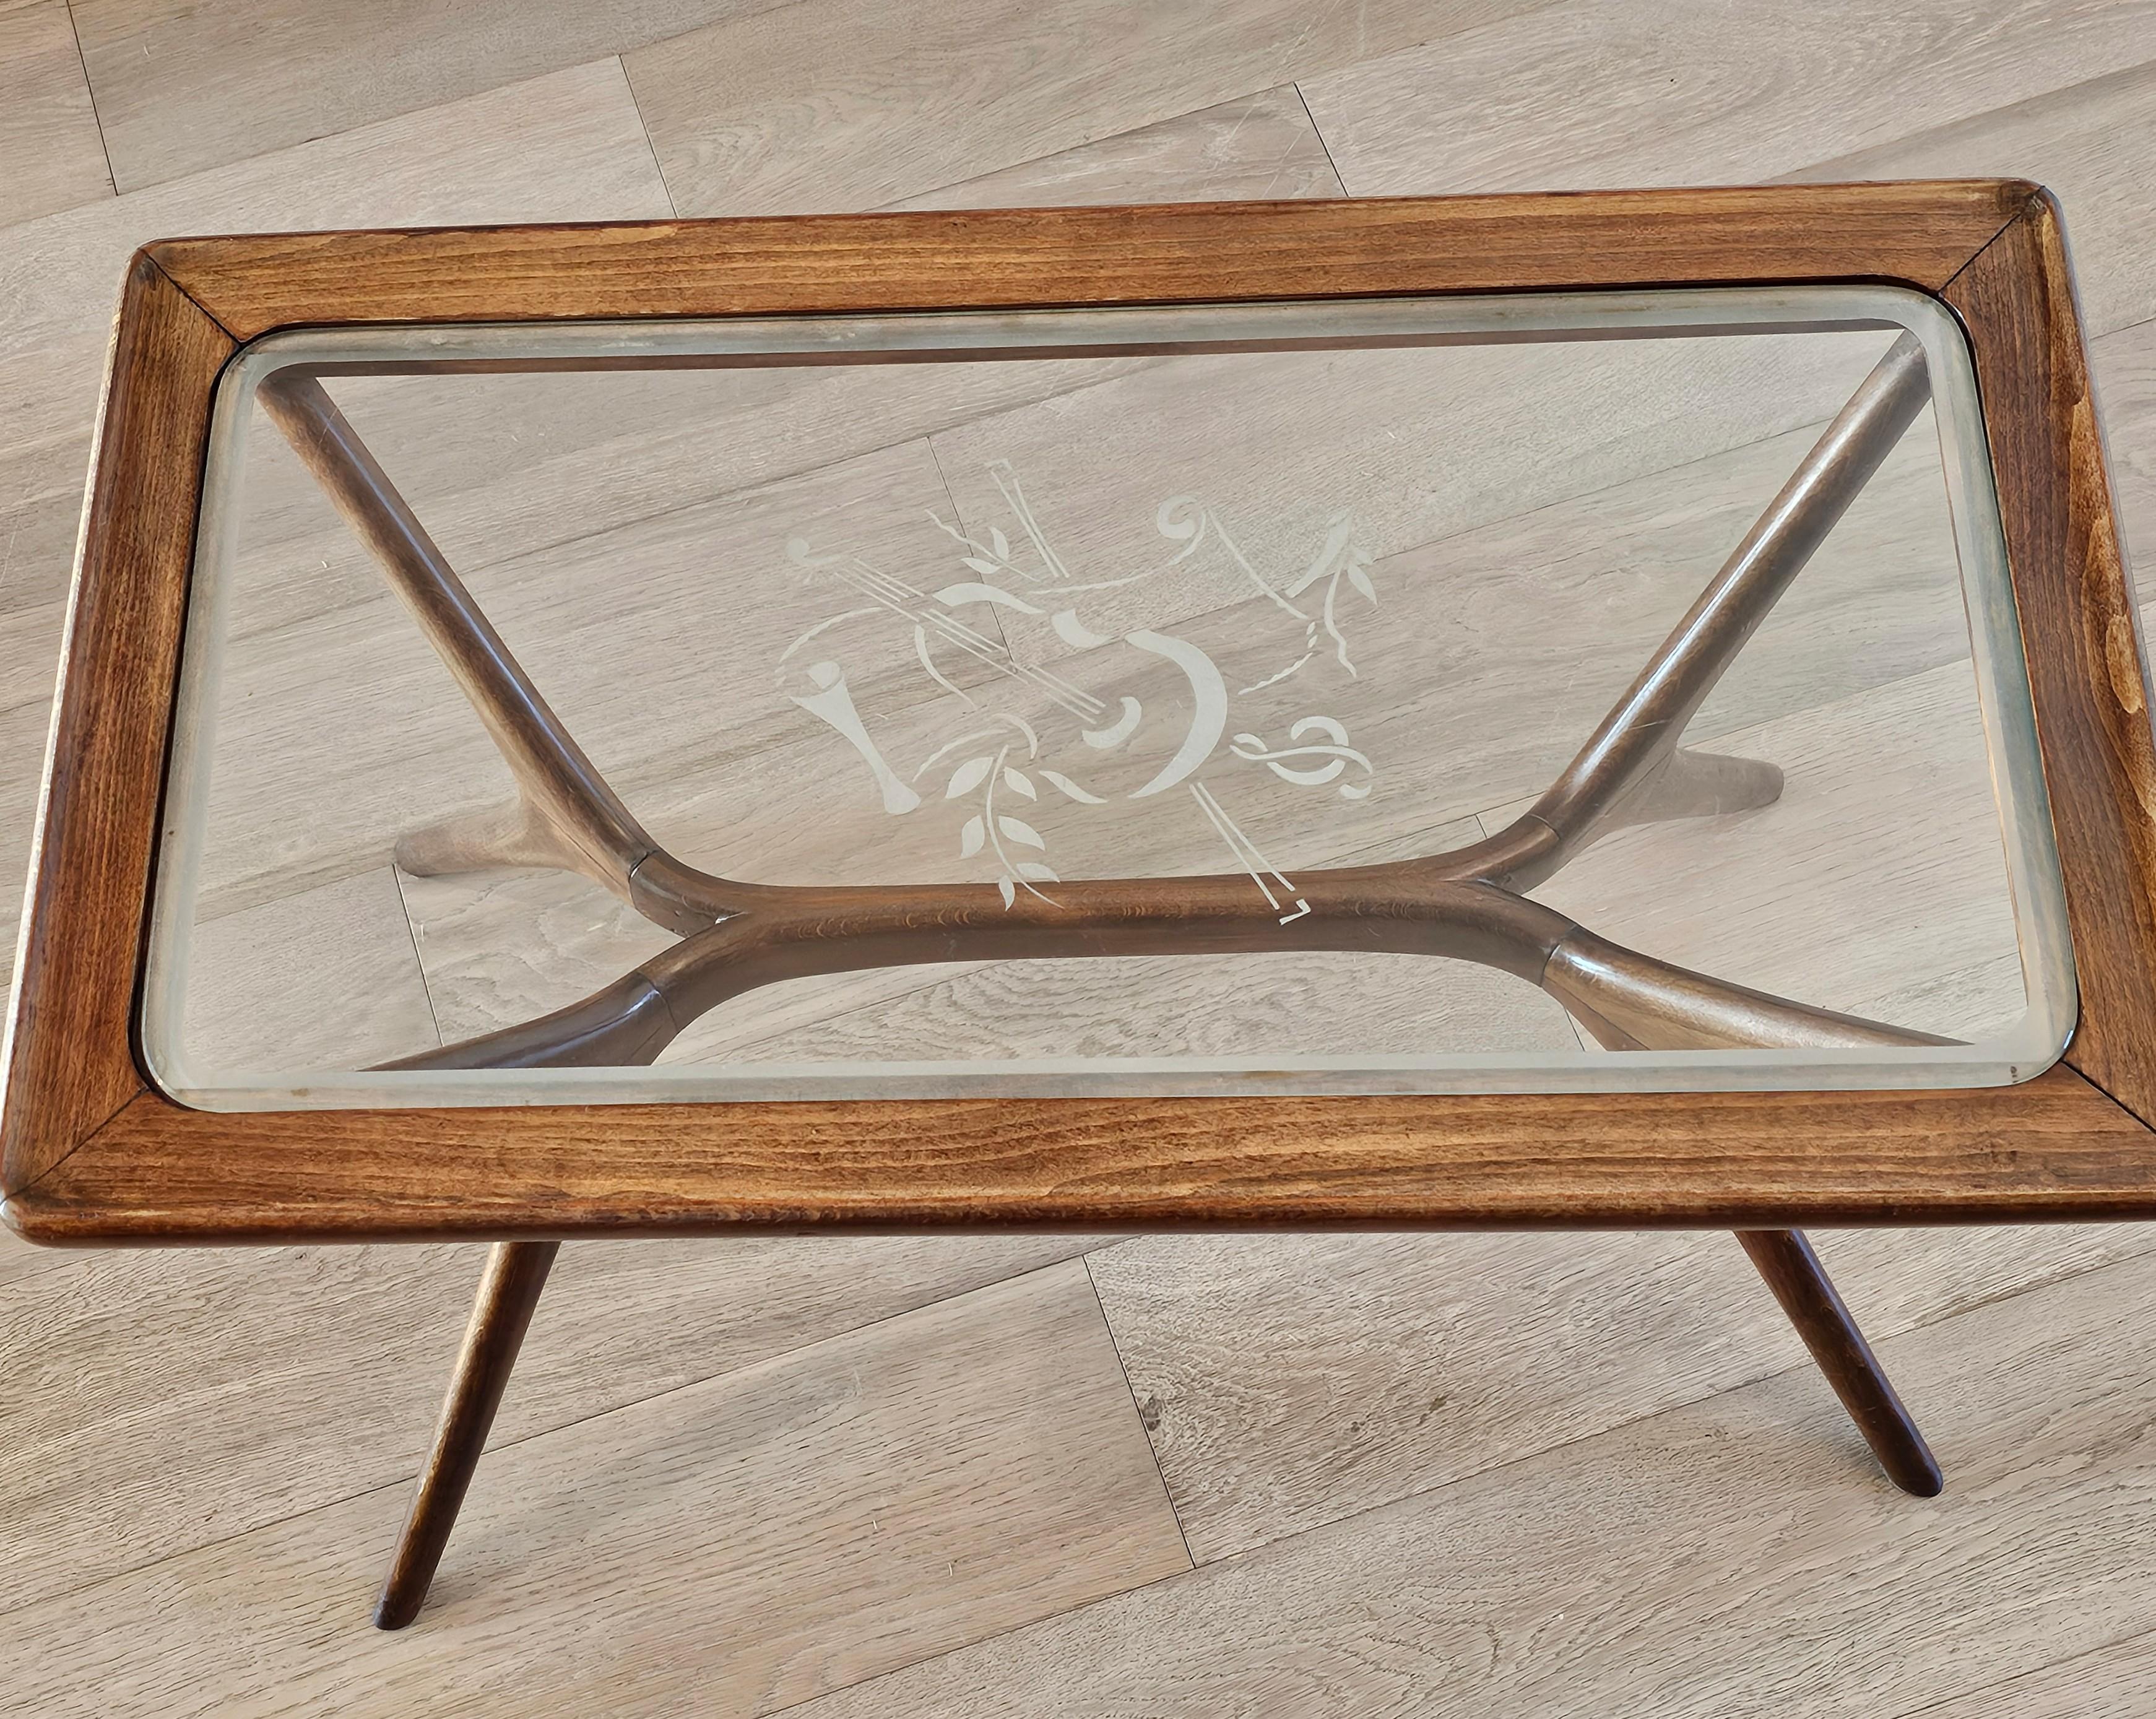 1950s Mid-Century Italian Modern Ico Parisi Style Sculptural Side Table  For Sale 4